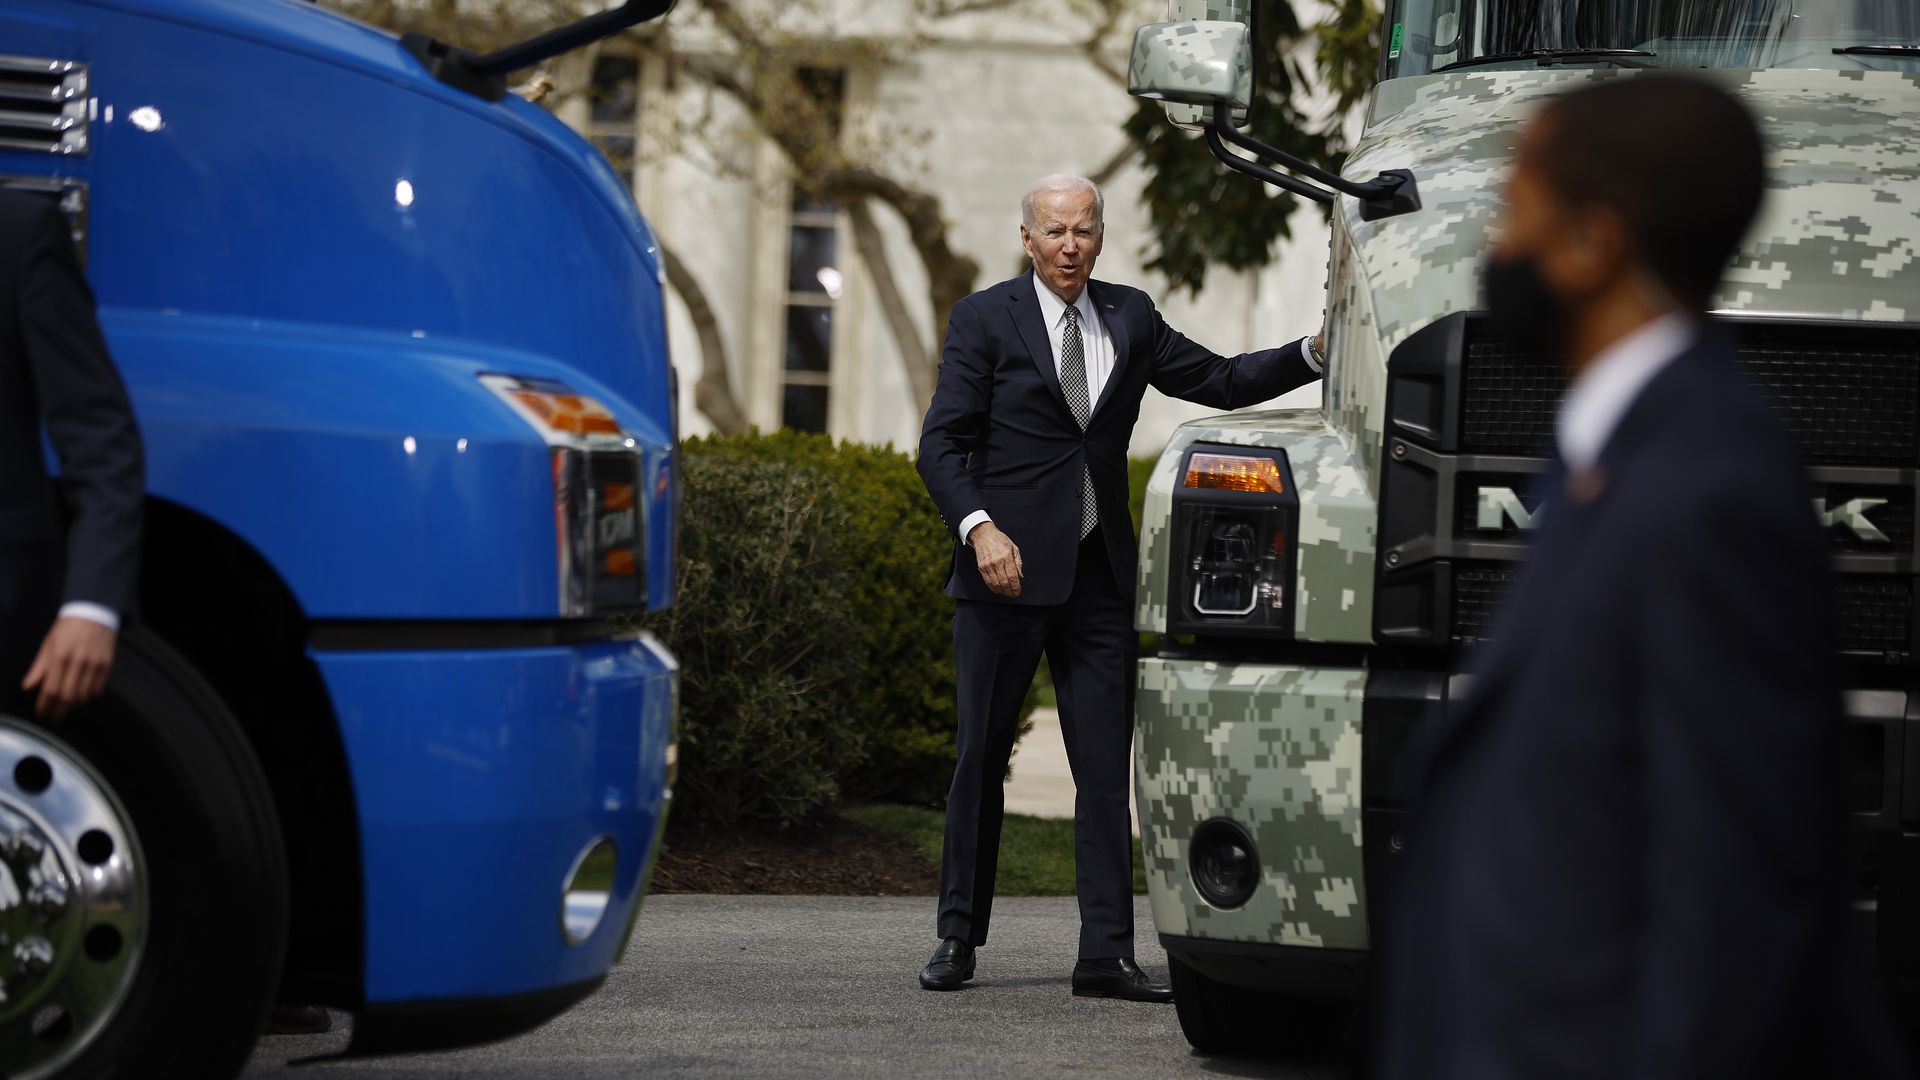 President Biden is seen standing between two trucks during a White House event on Monday.